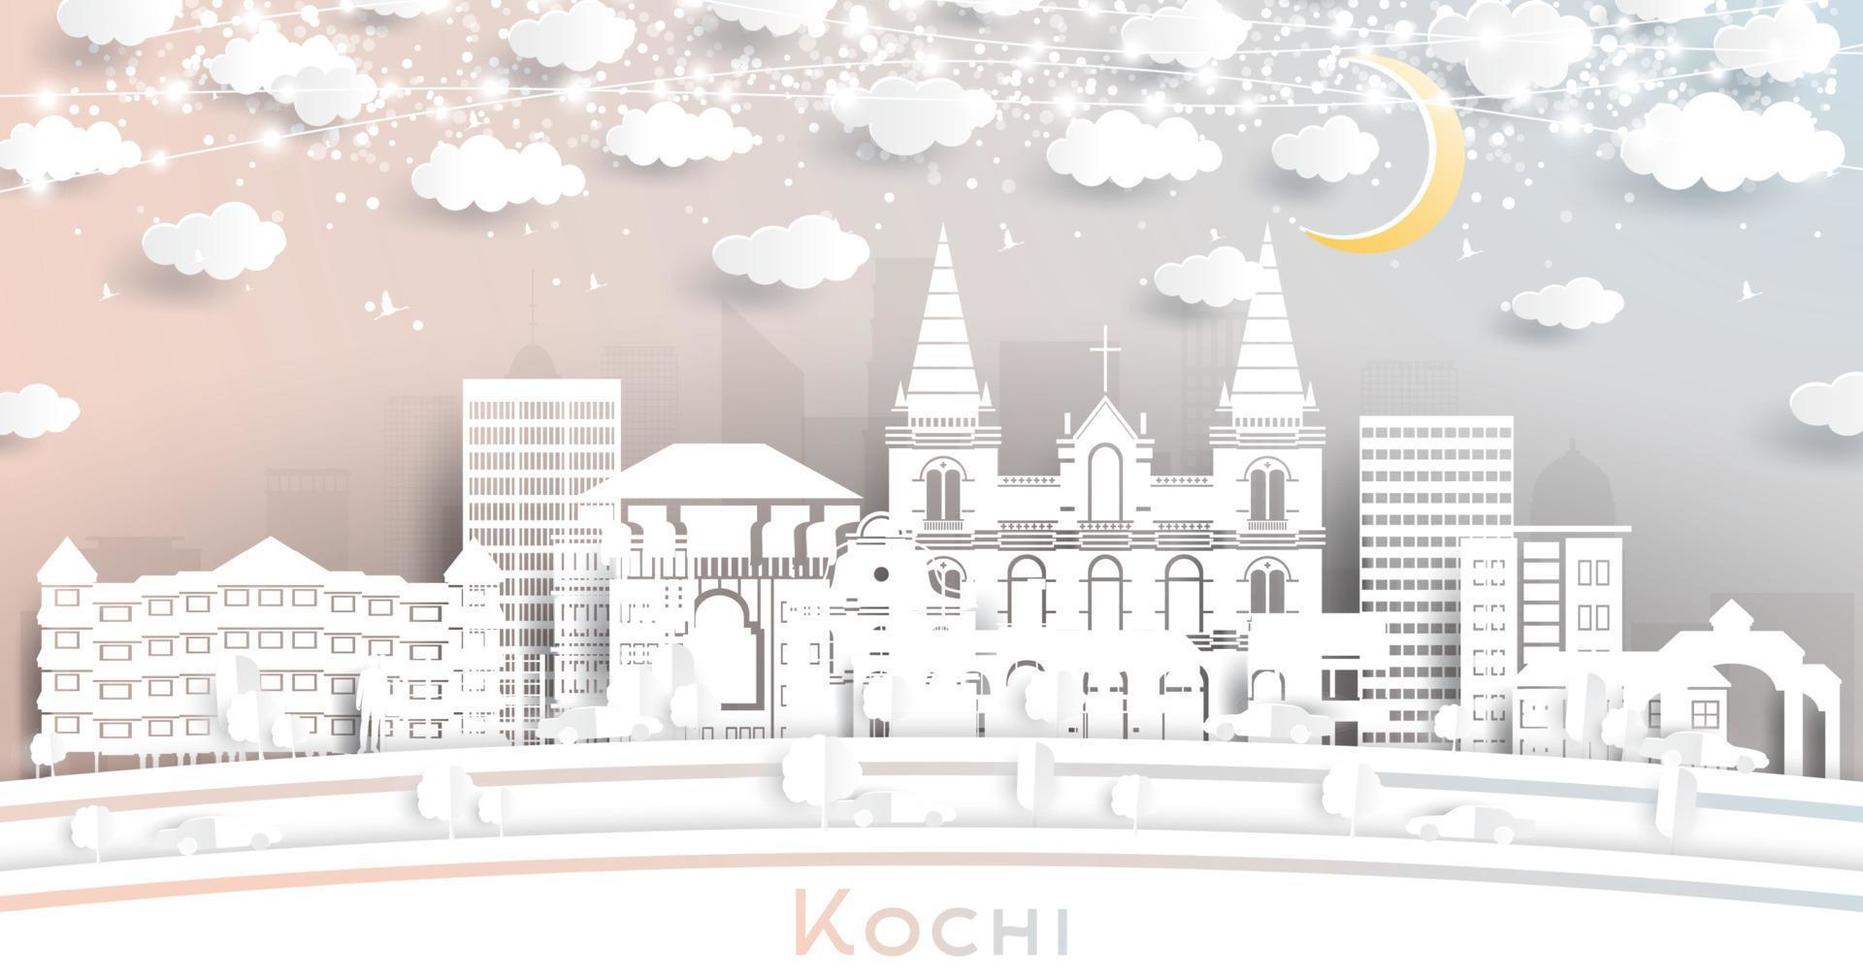 Kochi India City Skyline in Paper Cut Style with White Buildings, Moon and Neon Garland. vector